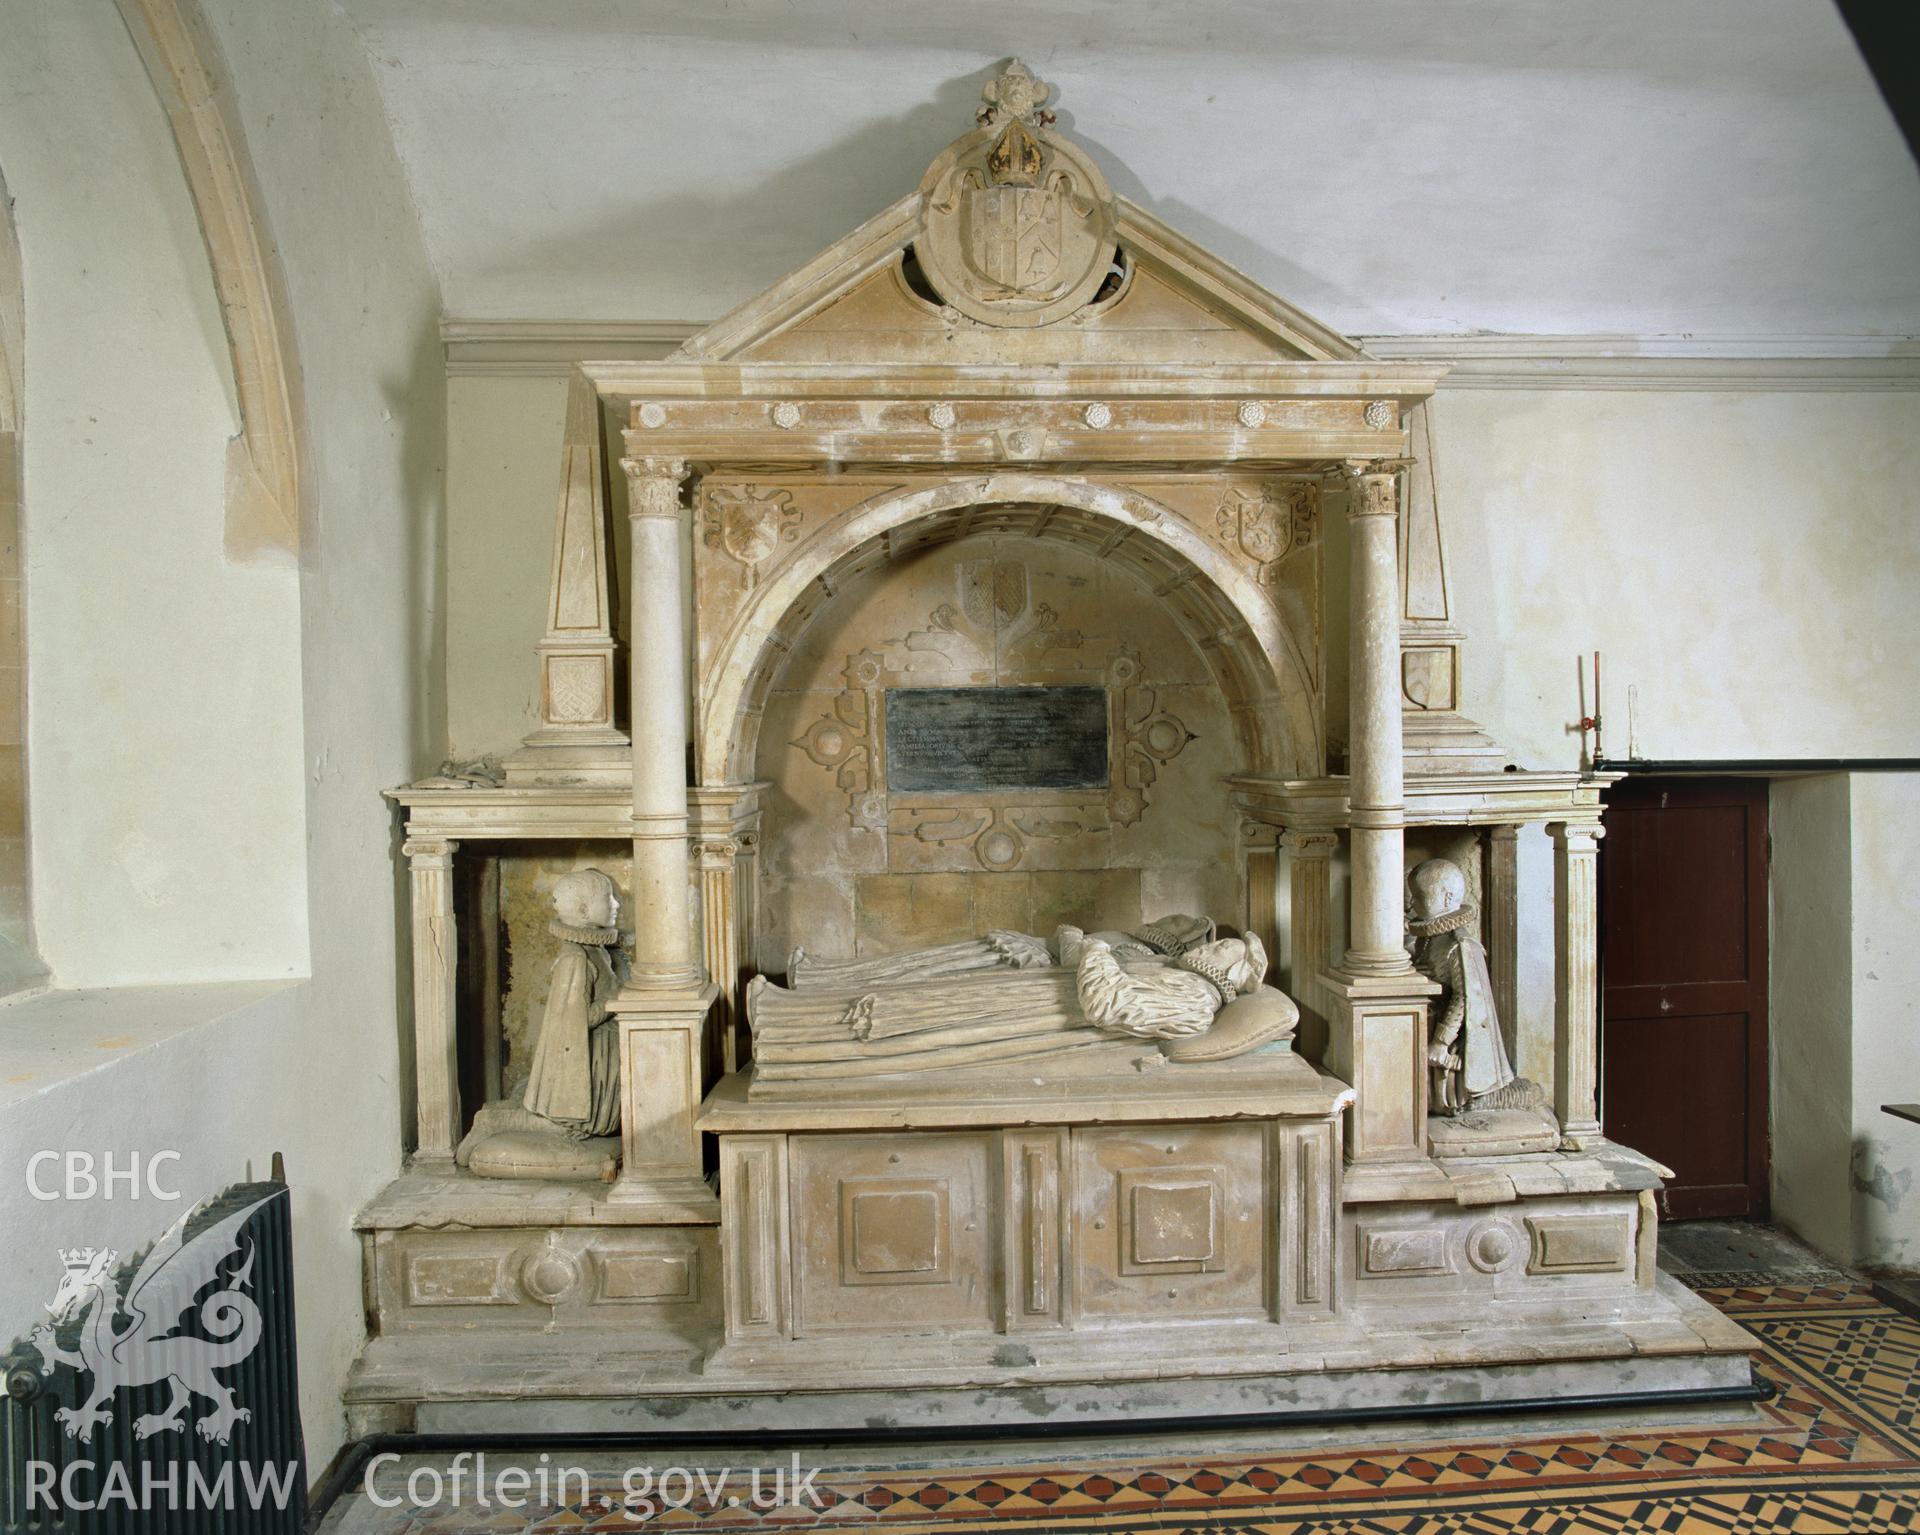 Colour transparency showing the Rudd monument at Llangathen Church, produced by Iain Wright, June 2004.